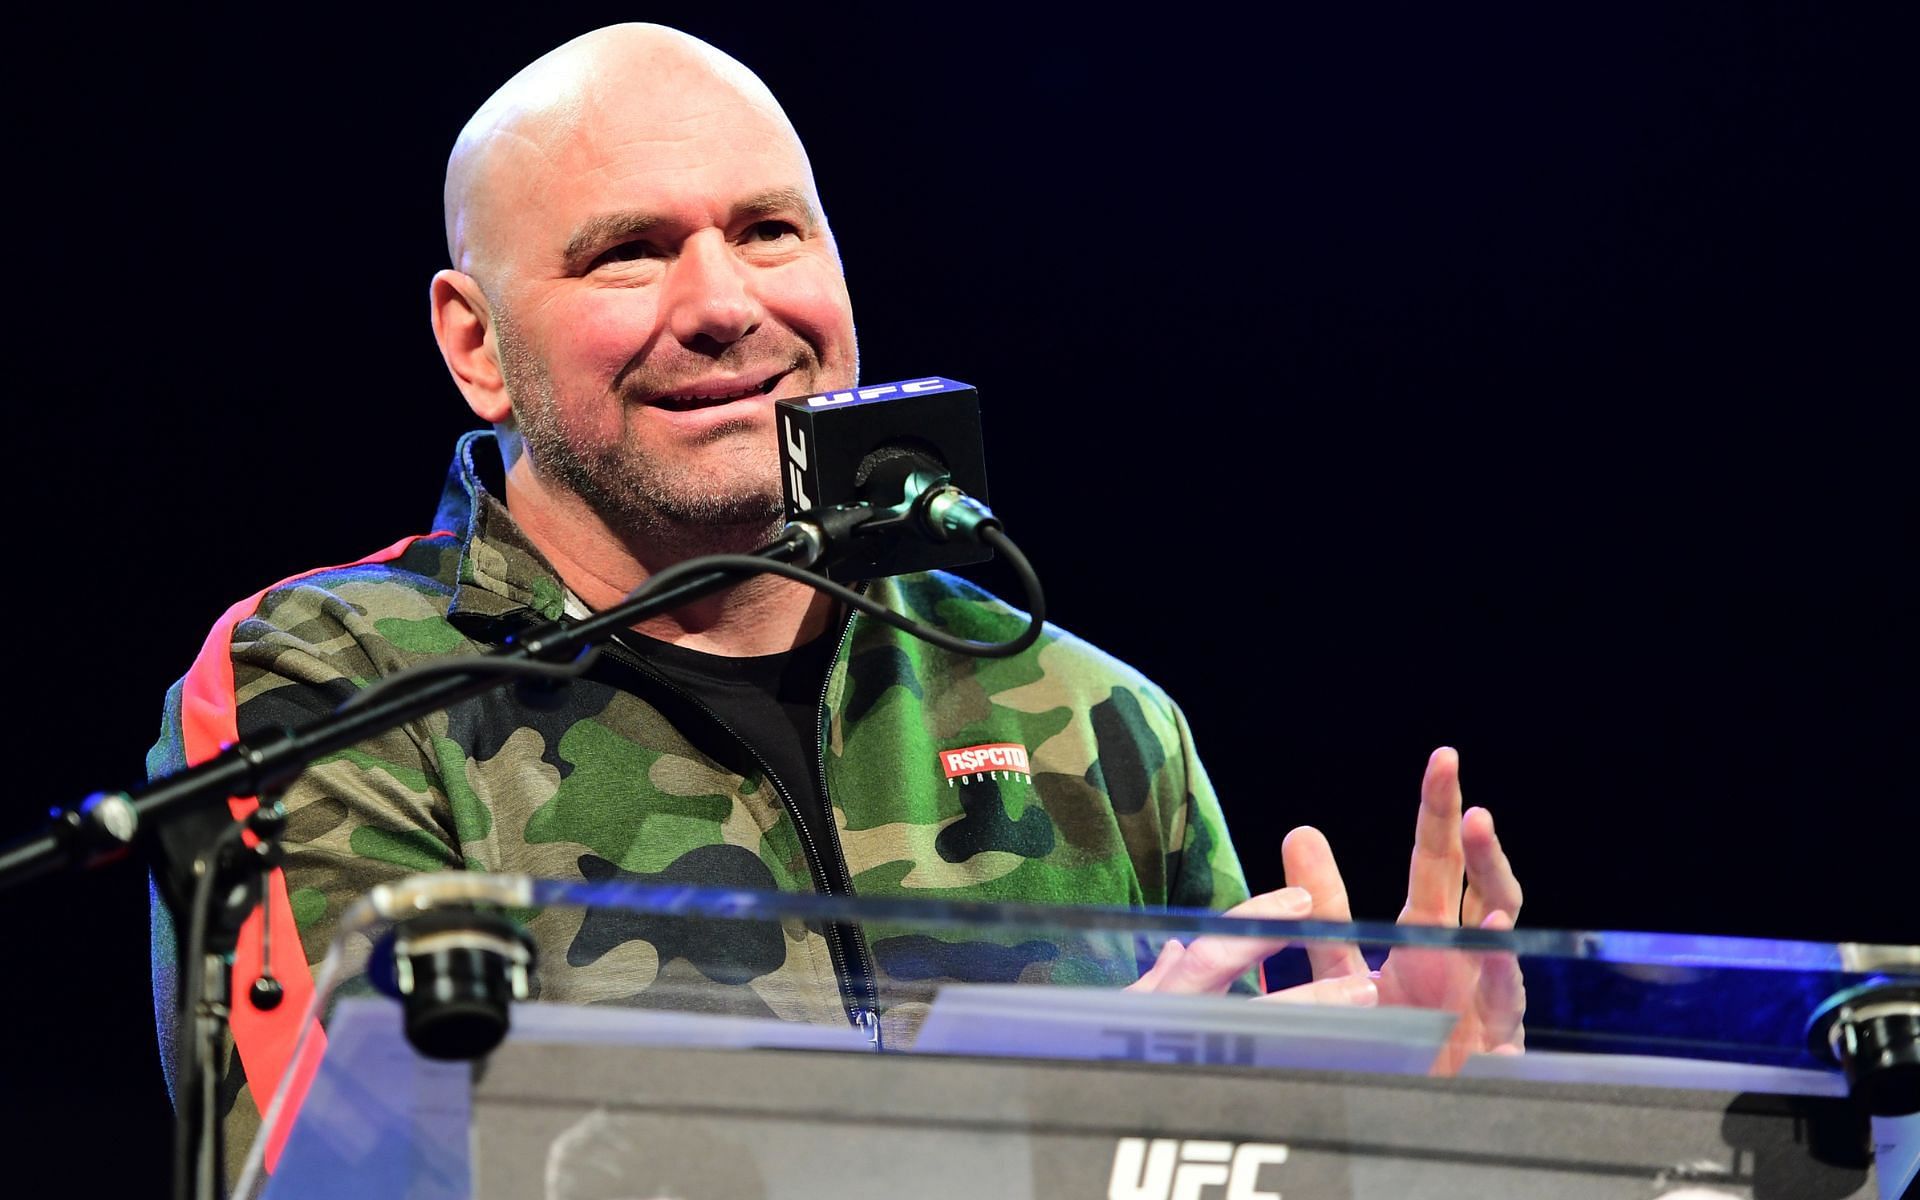 A former UFC champion has received plaudits from UFC CEO Dana White (inset) [Image courtesy: Getty Images]